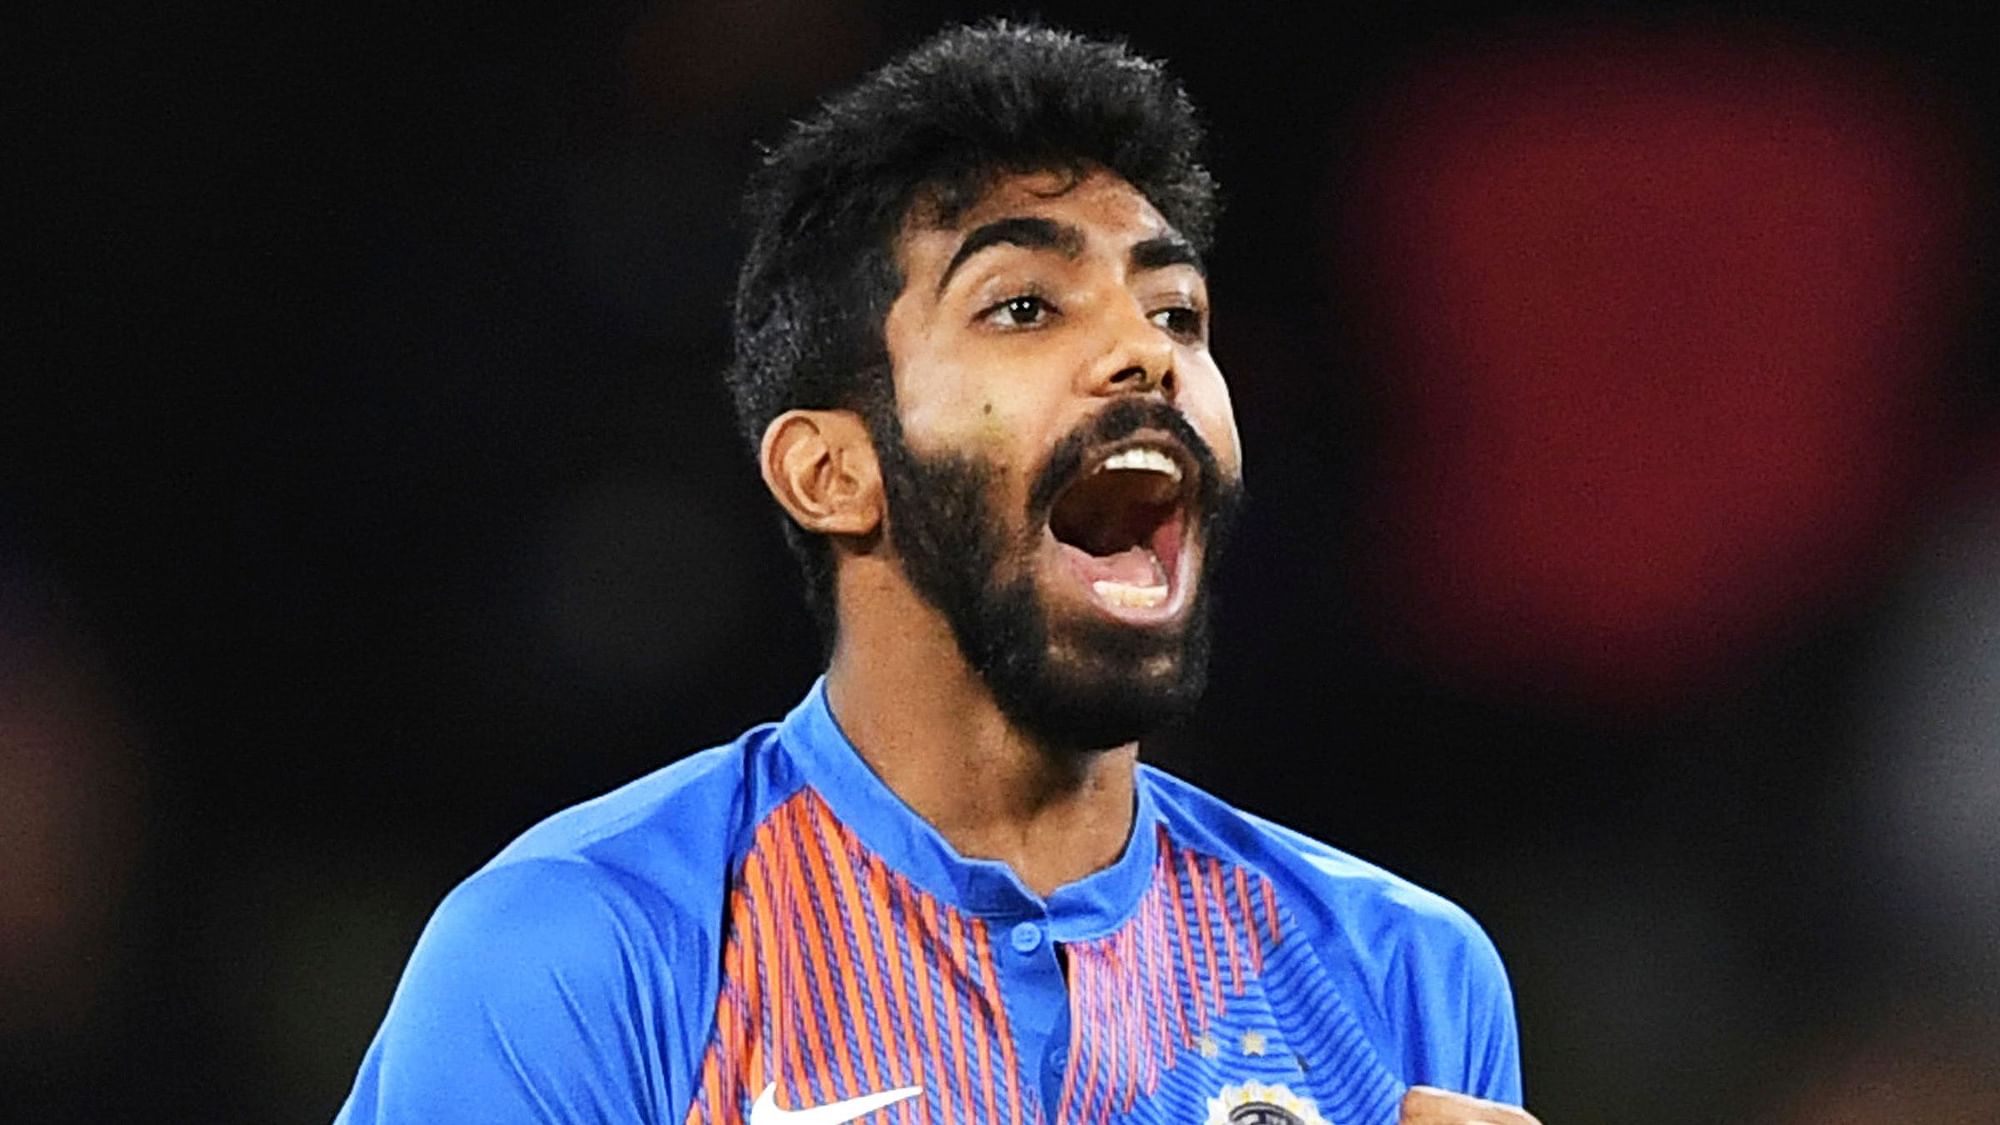 Jasprit Bumrah said many thought that he would be the “last person to play for India” given his unusual bowling action.